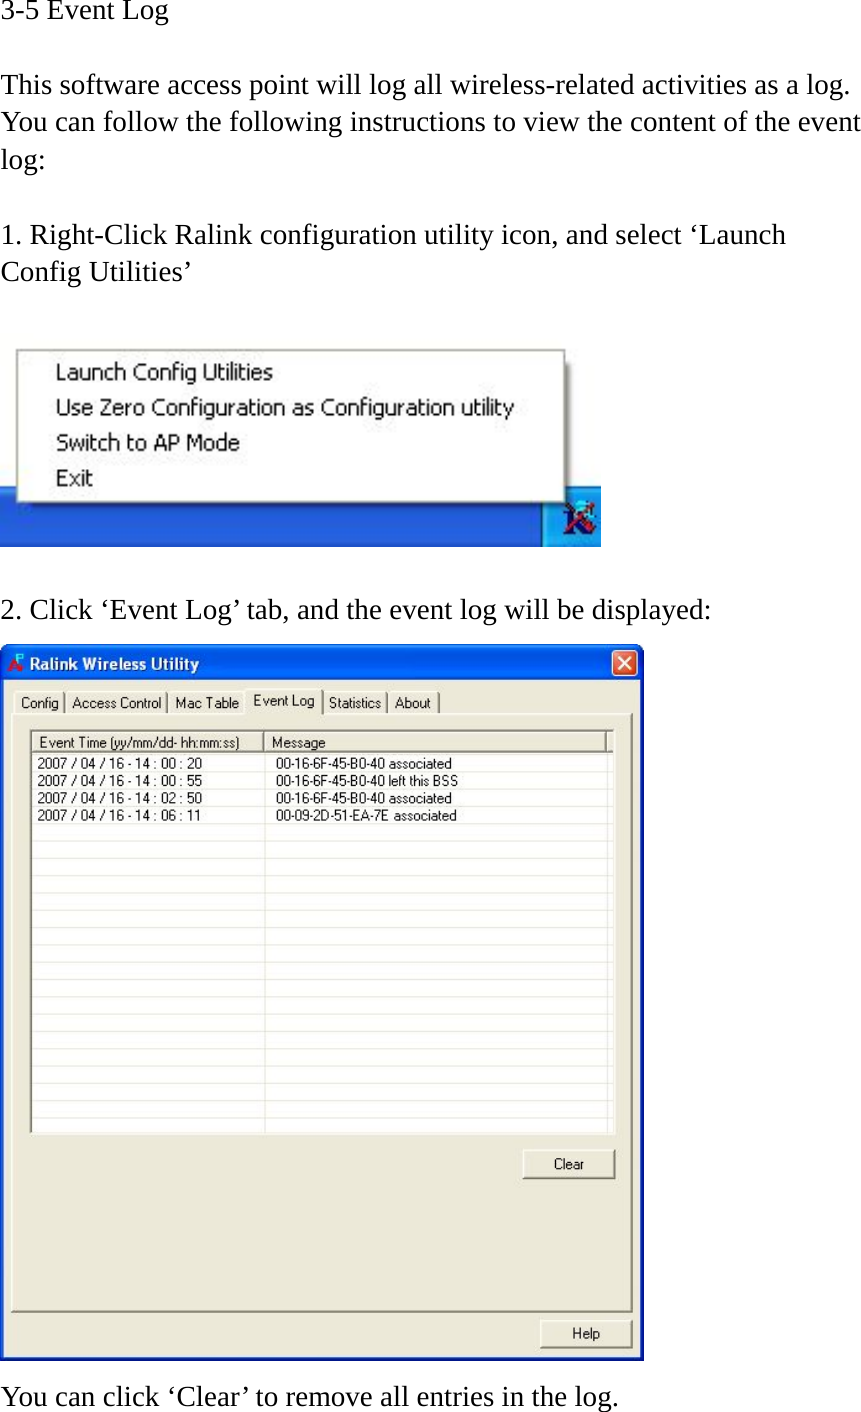 3-5 Event Log  This software access point will log all wireless-related activities as a log. You can follow the following instructions to view the content of the event log:  1. Right-Click Ralink configuration utility icon, and select ‘Launch Config Utilities’    2. Click ‘Event Log’ tab, and the event log will be displayed:  You can click ‘Clear’ to remove all entries in the log. 